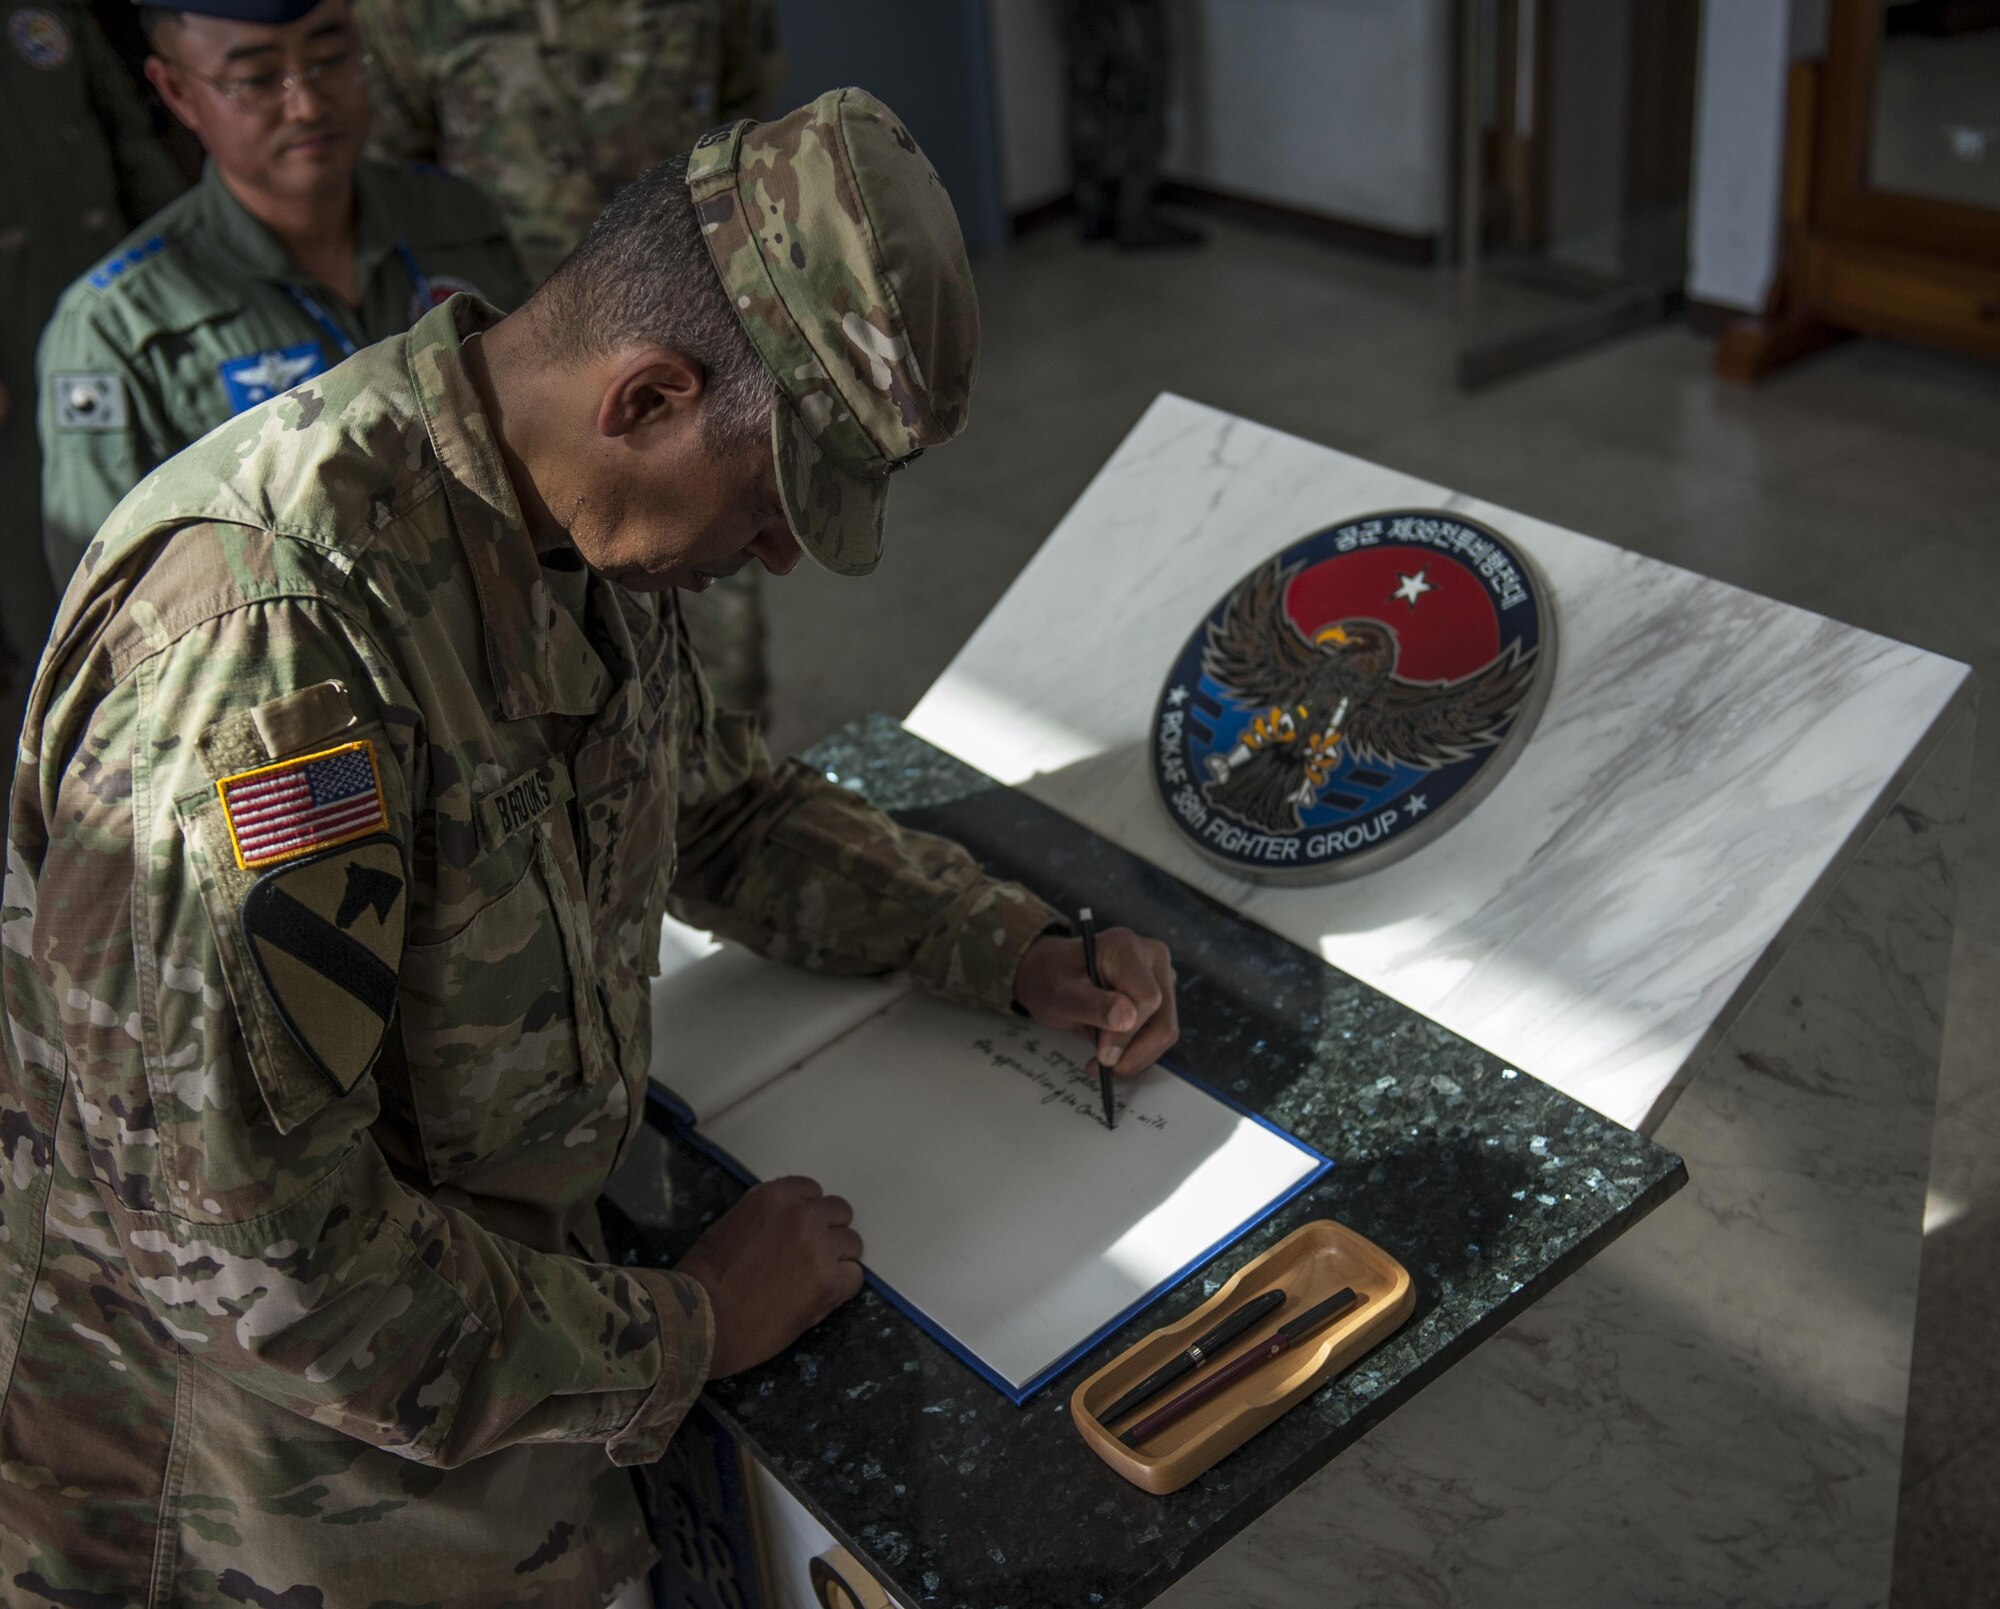 U.S. Army Gen. Vincent K. Brooks, U.S. Forces Korea commander, signs a guest book June 22, 2017, during a visit at Kunsan Air Base, Republic of Korea. Brooks visited Kunsan Air Base to discuss the operational and support capabilities the different squadrons provide to the USFK mission and familiarize himself with the base. (U.S. Air Force photo by Senior Airman Colville McFee/Released)